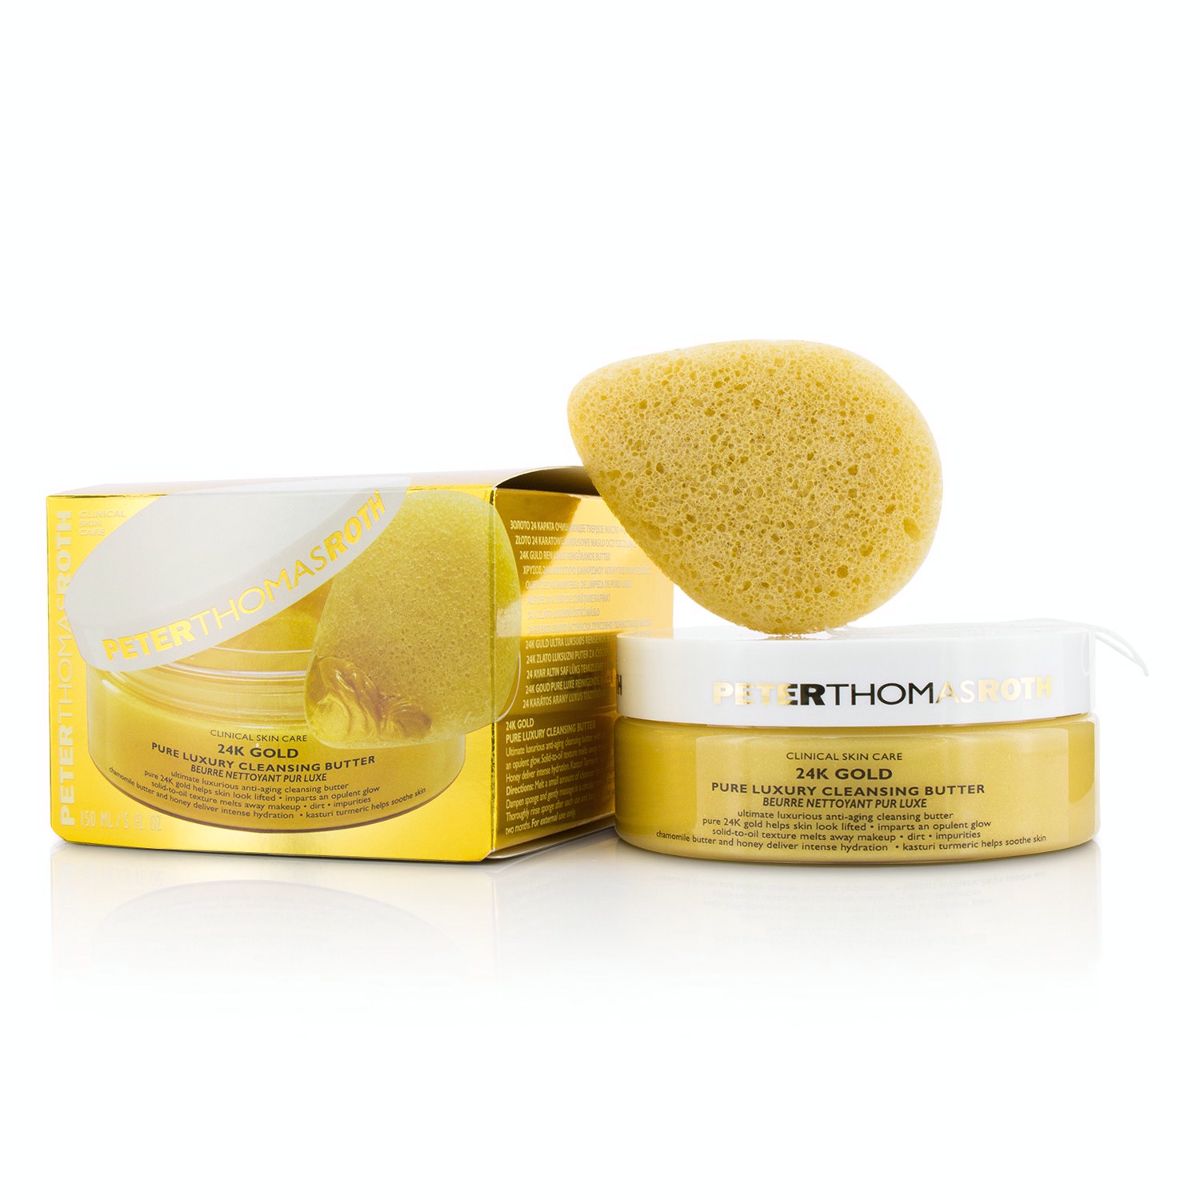 24K Gold Pure Luxury Cleansing Butter Peter Thomas Roth Image